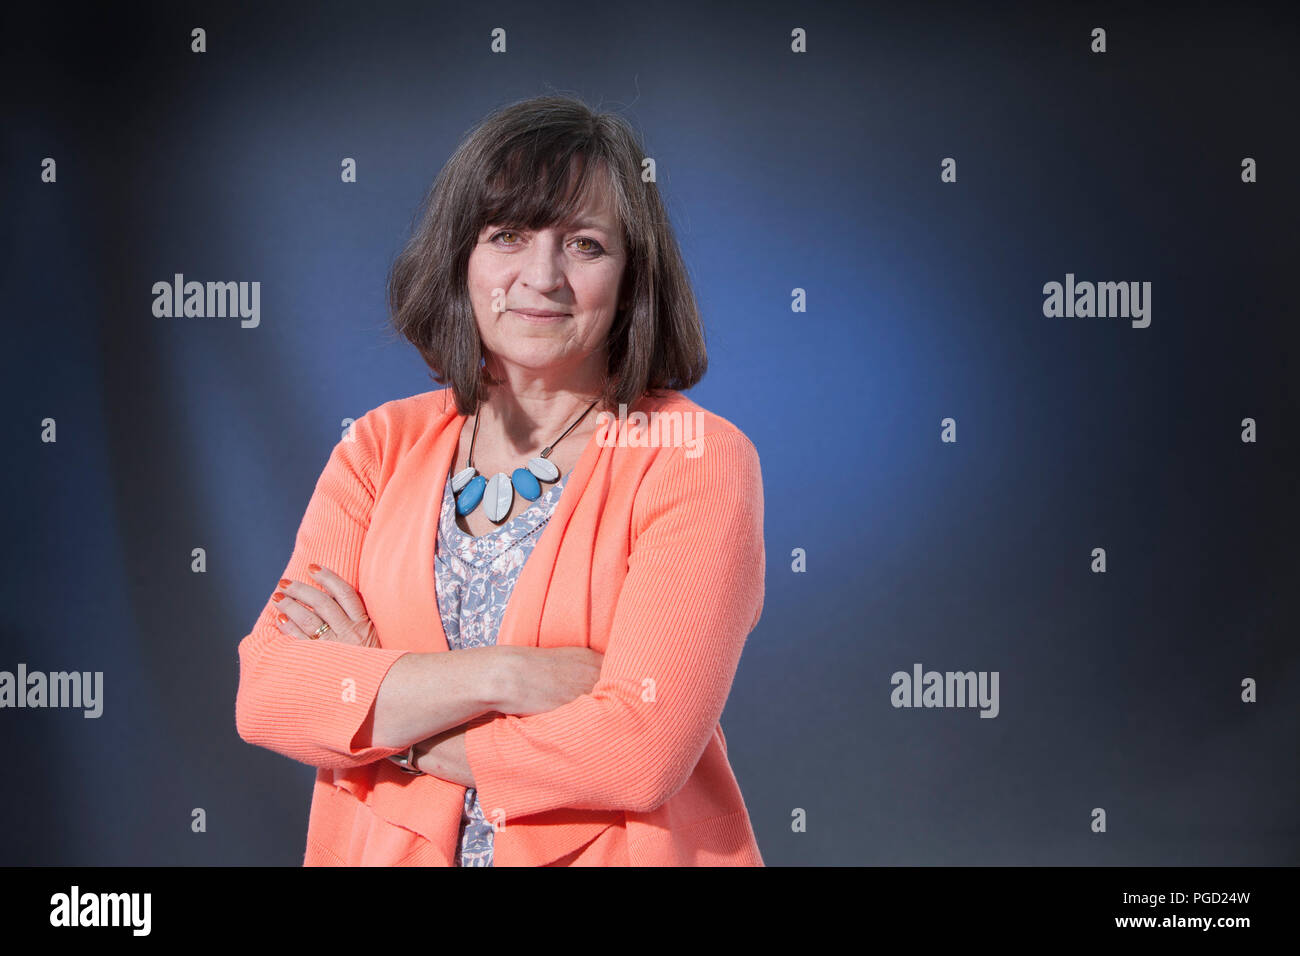 Edinburgh, UK. 25th August, 2018. Dr. Kathryn Mannix is a physician specializing in palliative care, and a cognitive behavior therapist (CBT), and author. Pictured at the Edinburgh International Book Festival. Edinburgh, Scotland.  Picture by Gary Doak / Alamy Live News Stock Photo